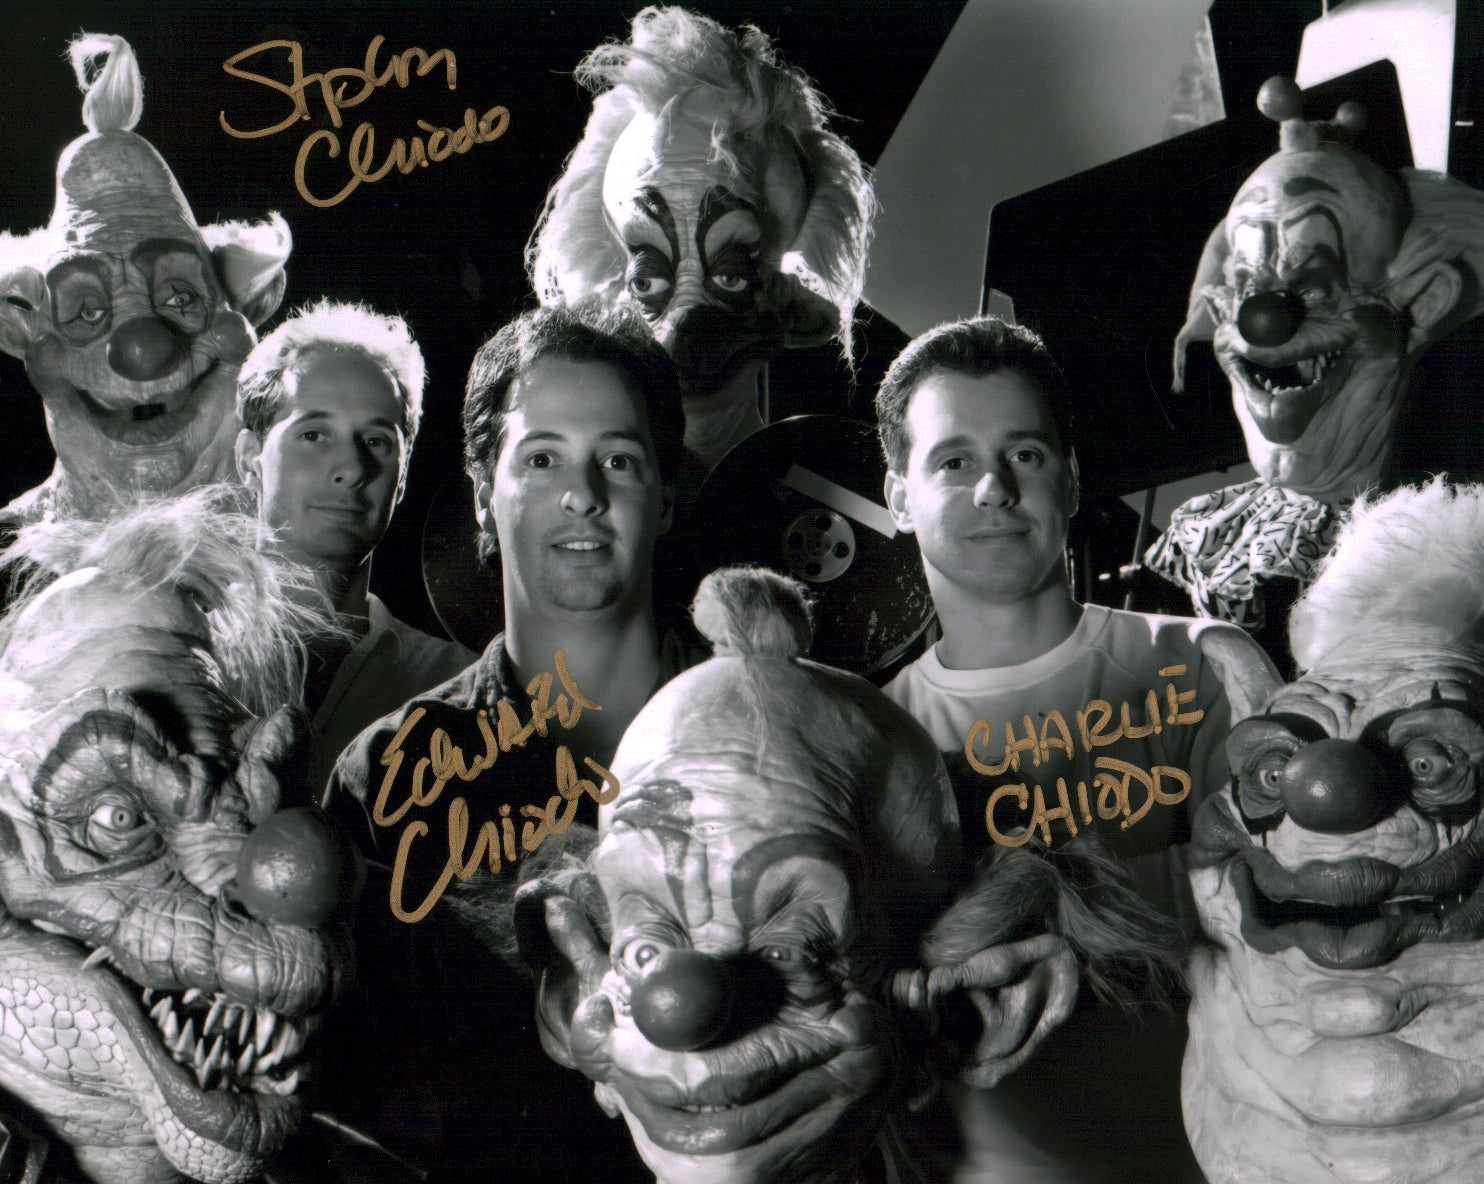 Killer Klowns from Outer space 8x10 Signed Photo JSA Certified Autograph